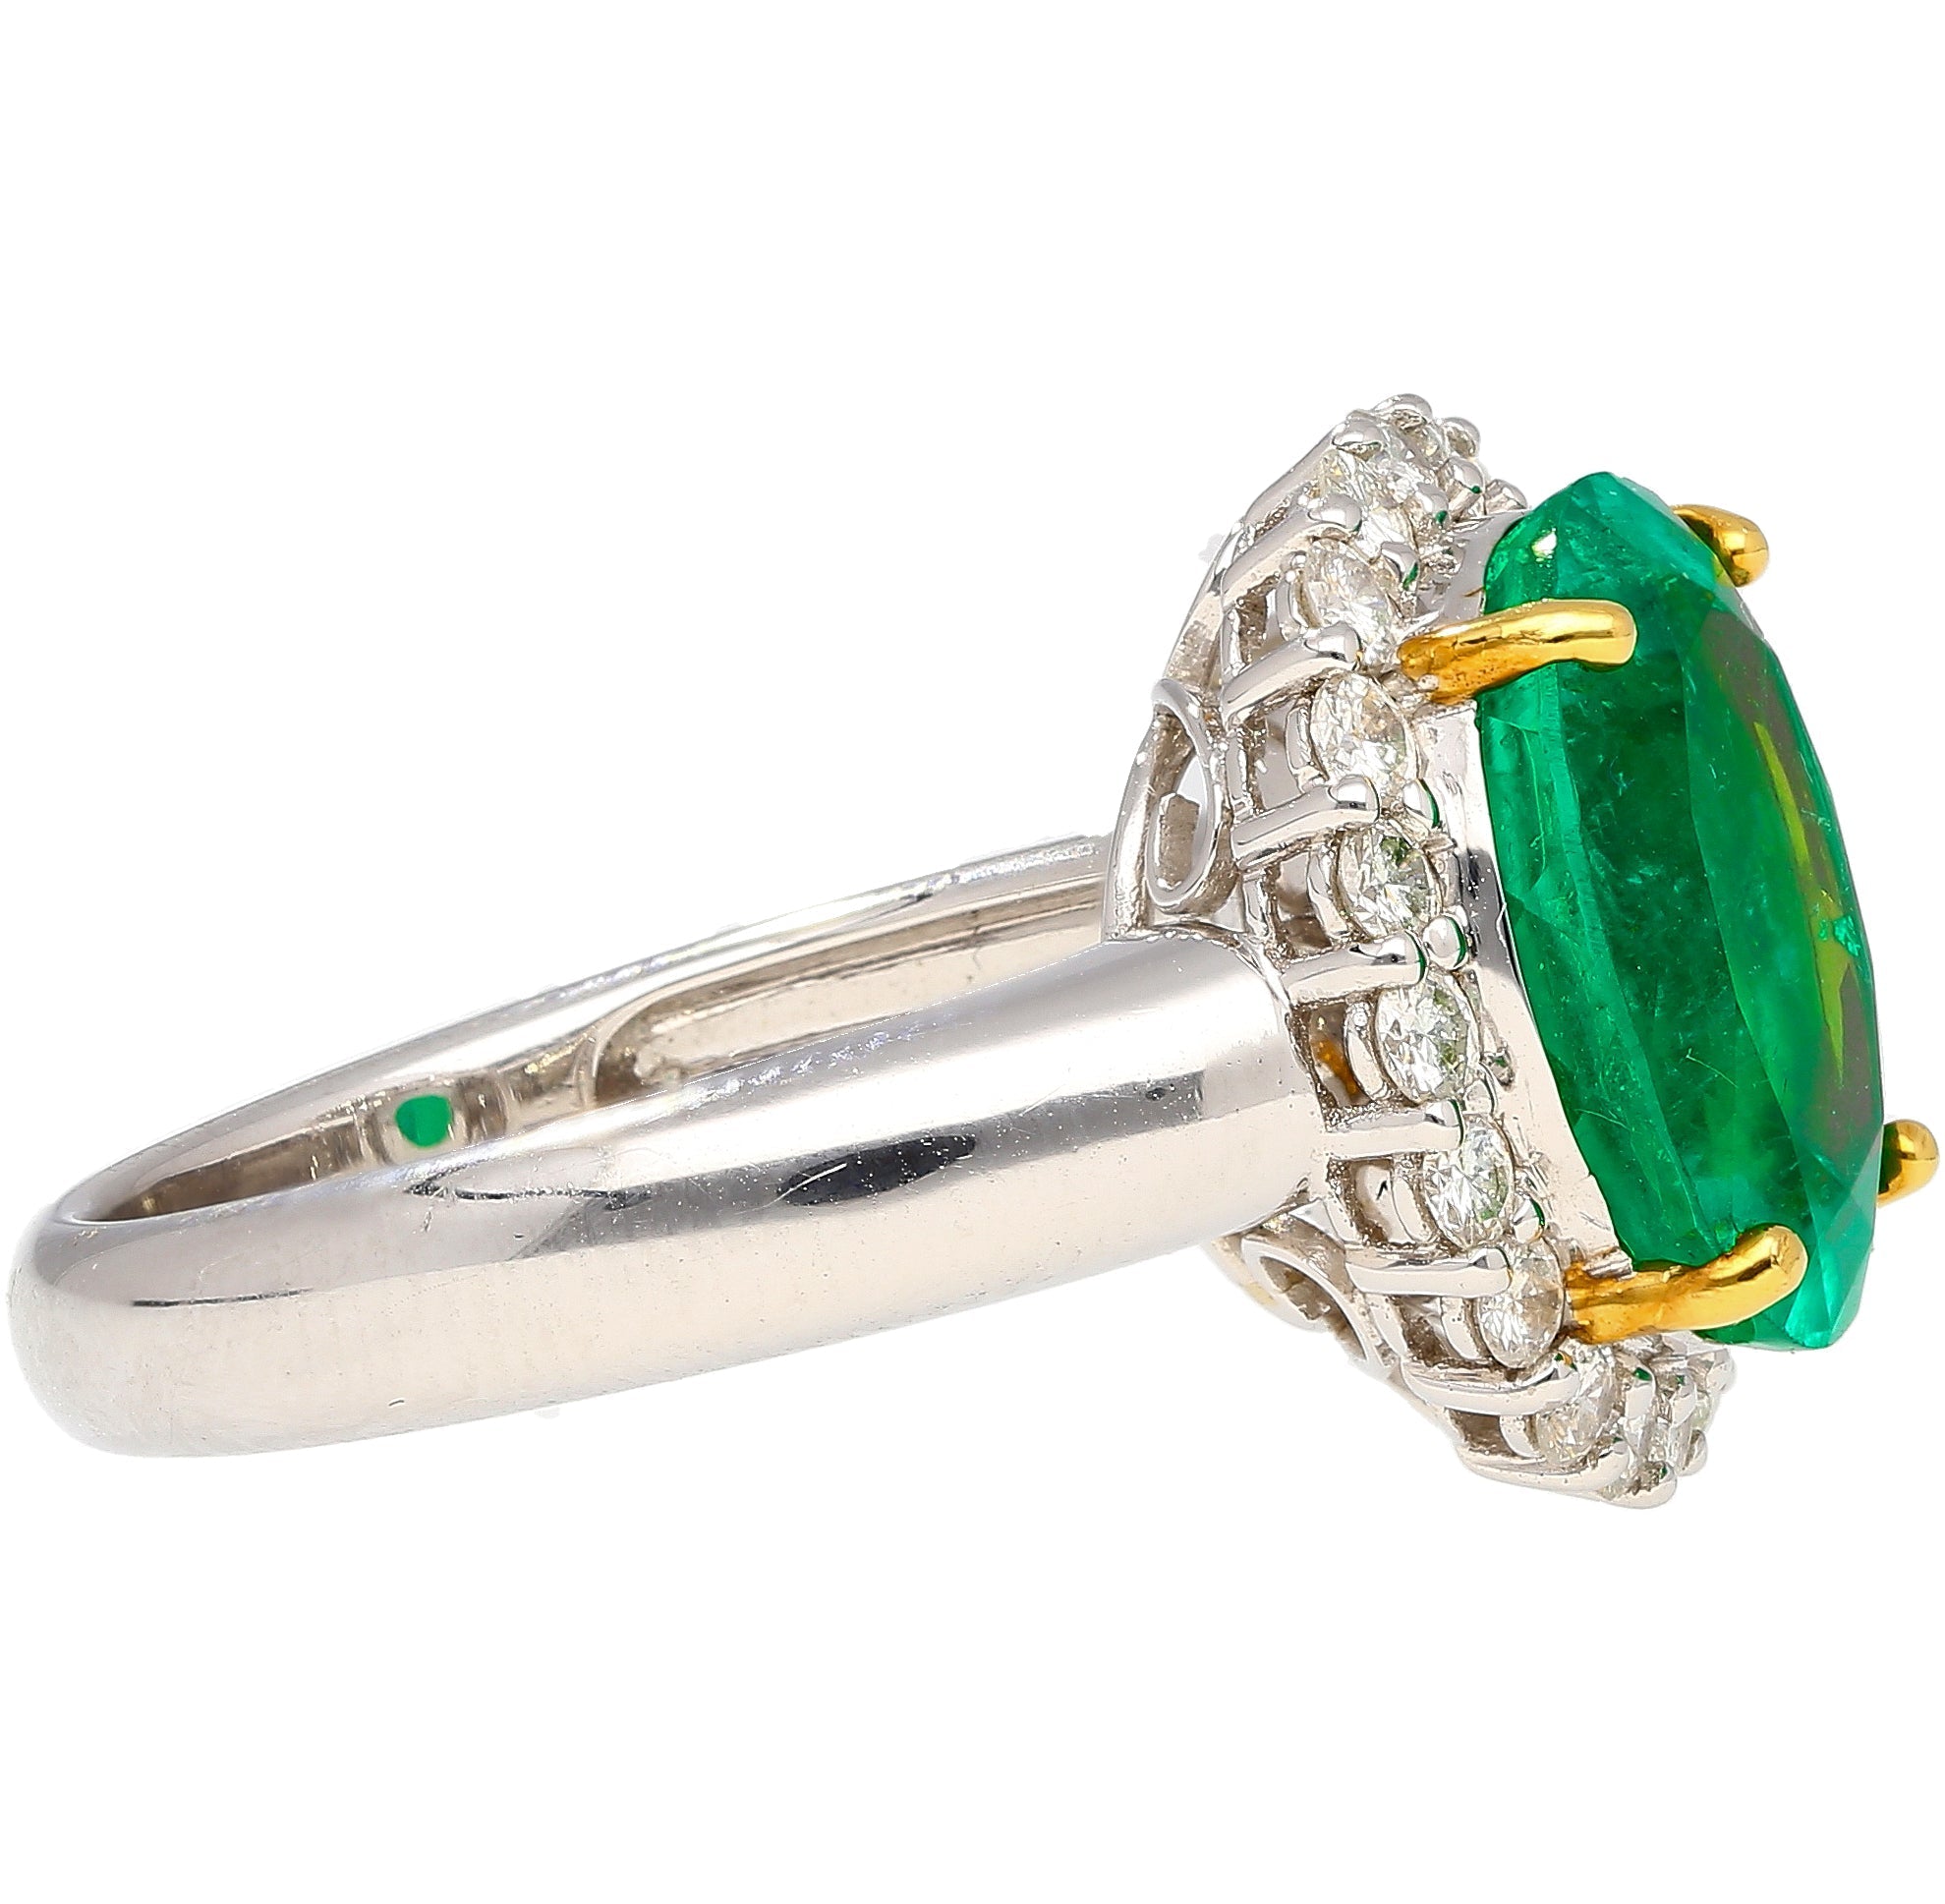 GRS Certified 5.03 Carat Oval Cut Minor Oil Colombian Emerald Ring with Diamond Halo in 18K White Gold